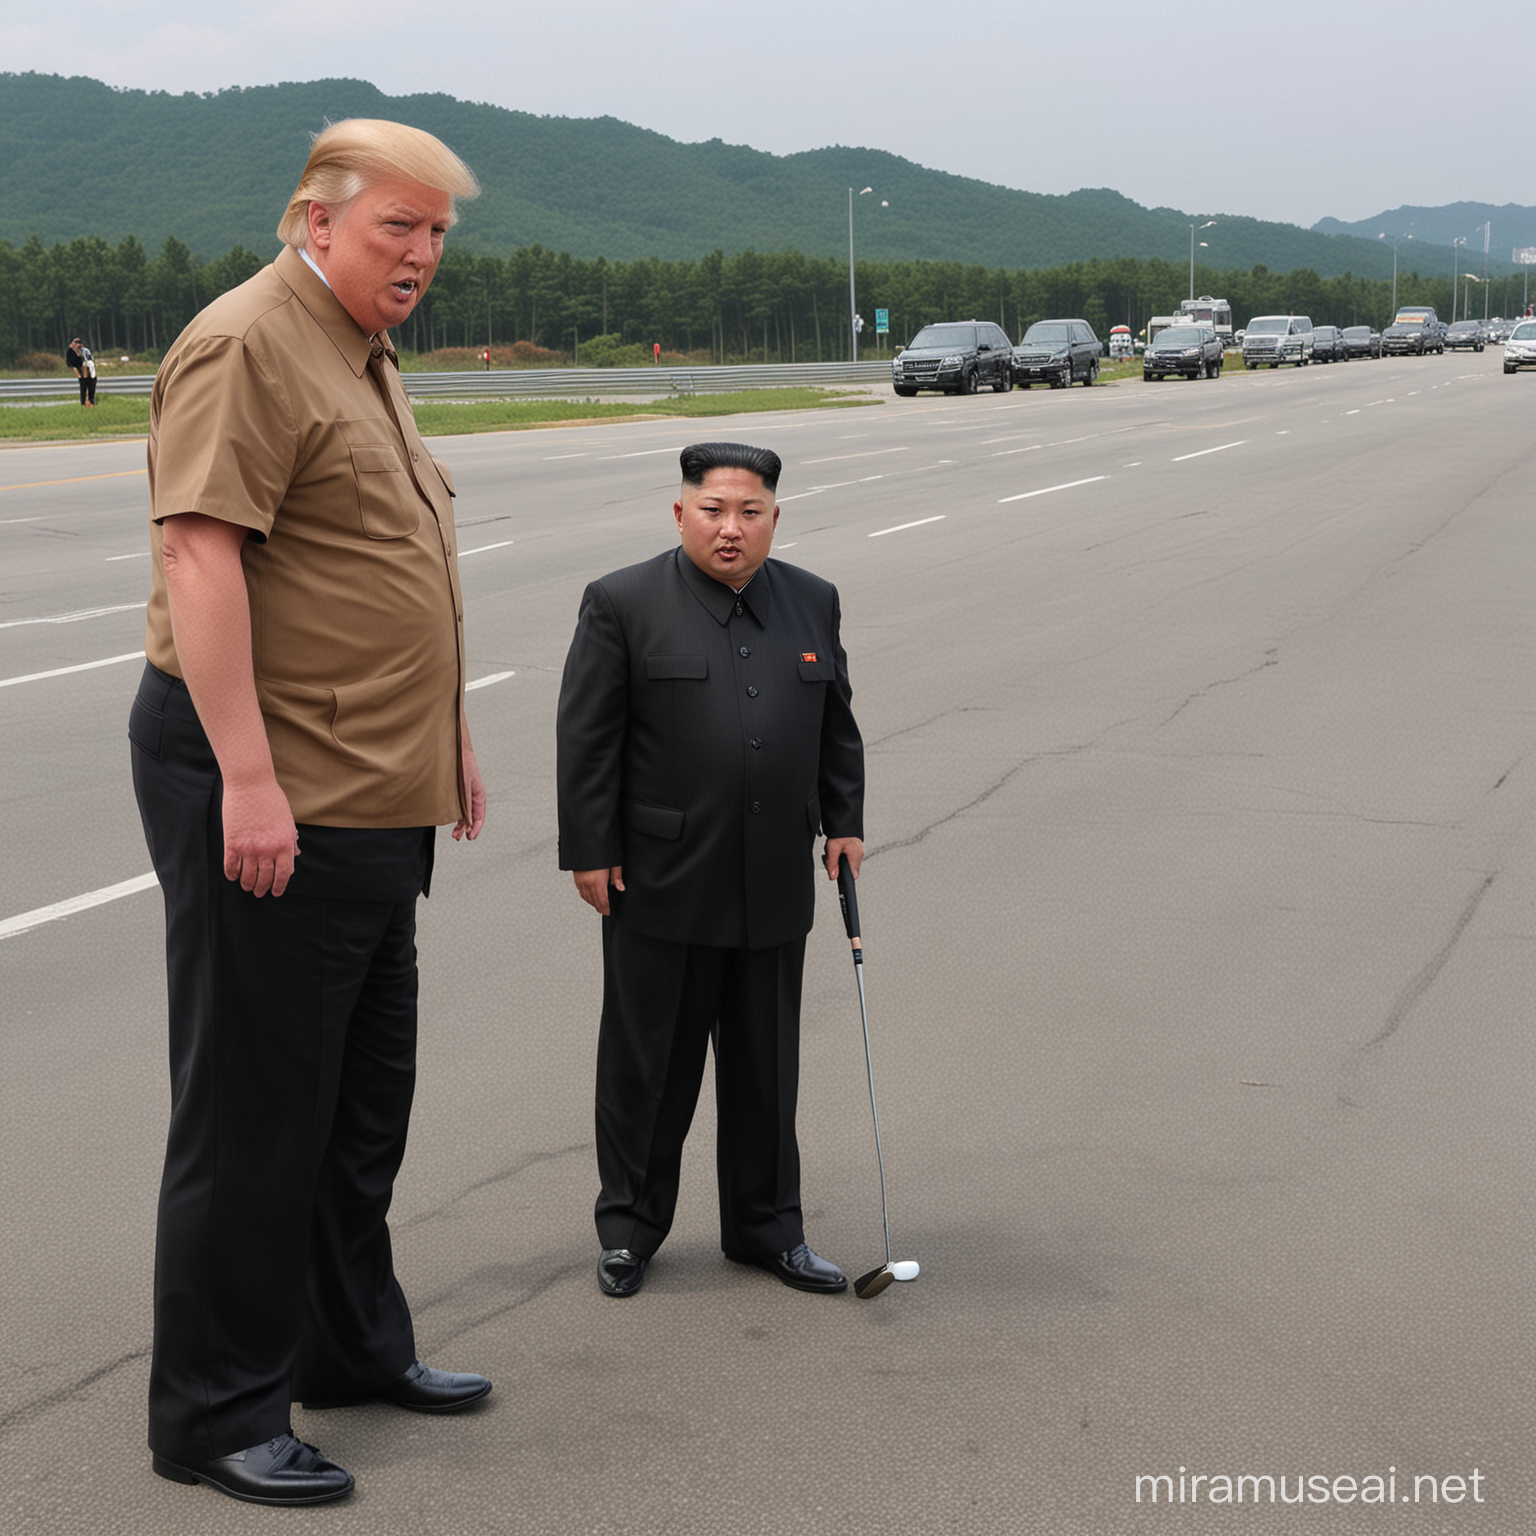 Kim Jong Un and Donald Trump Golfing on a Busy Intersection